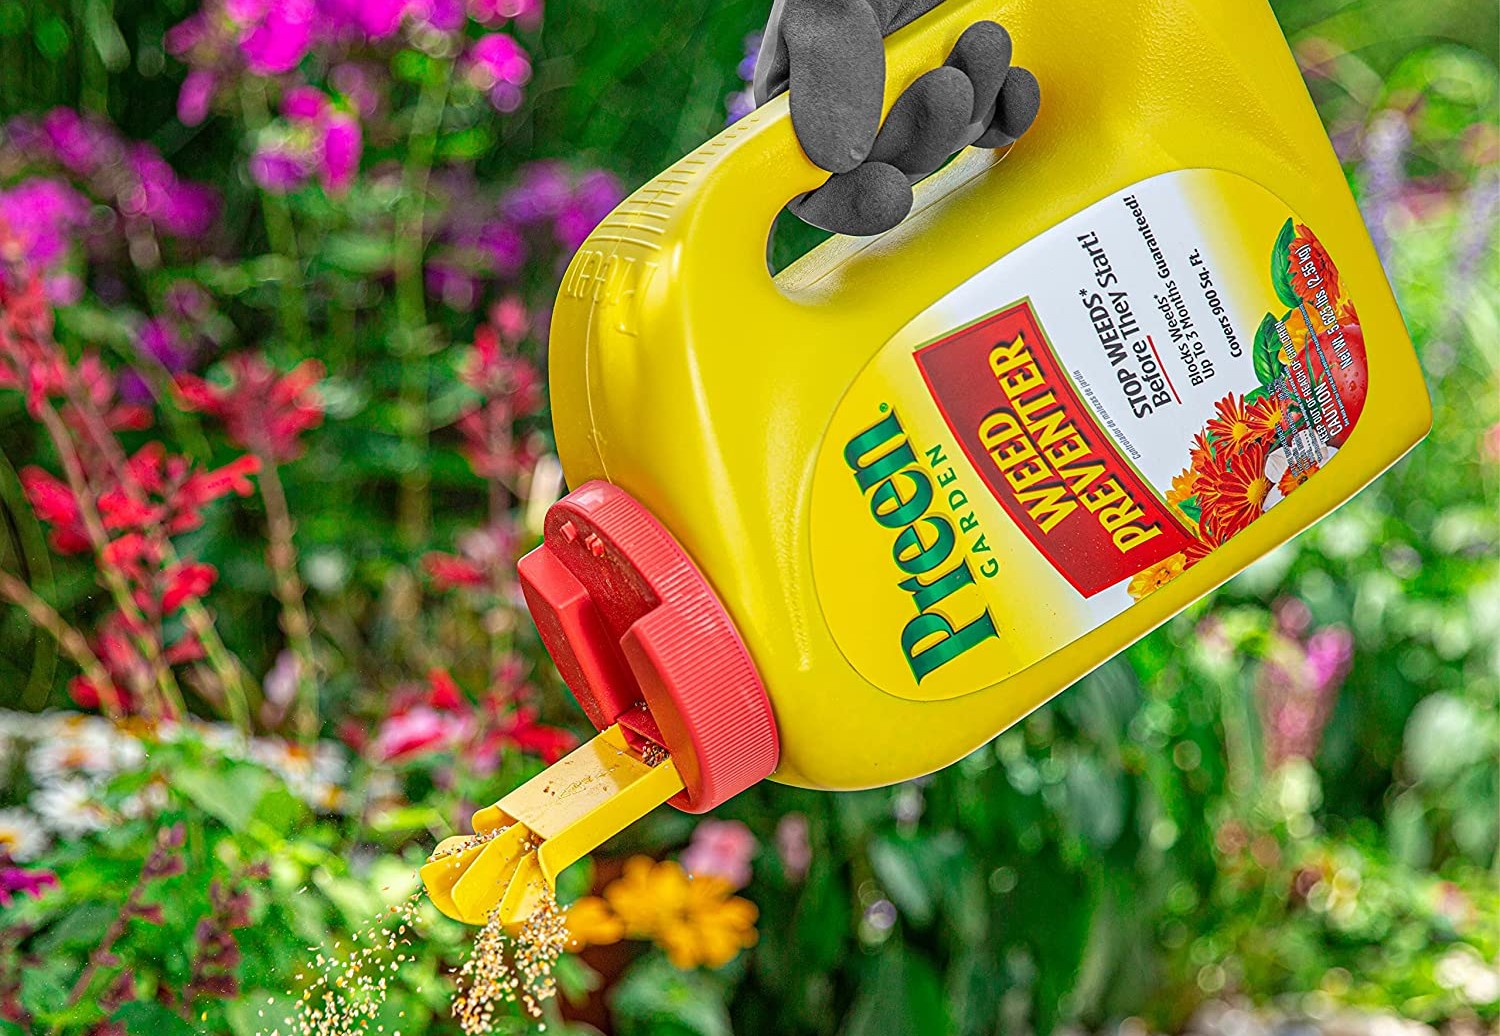 The Best Weed Killer for Flower Beds Options